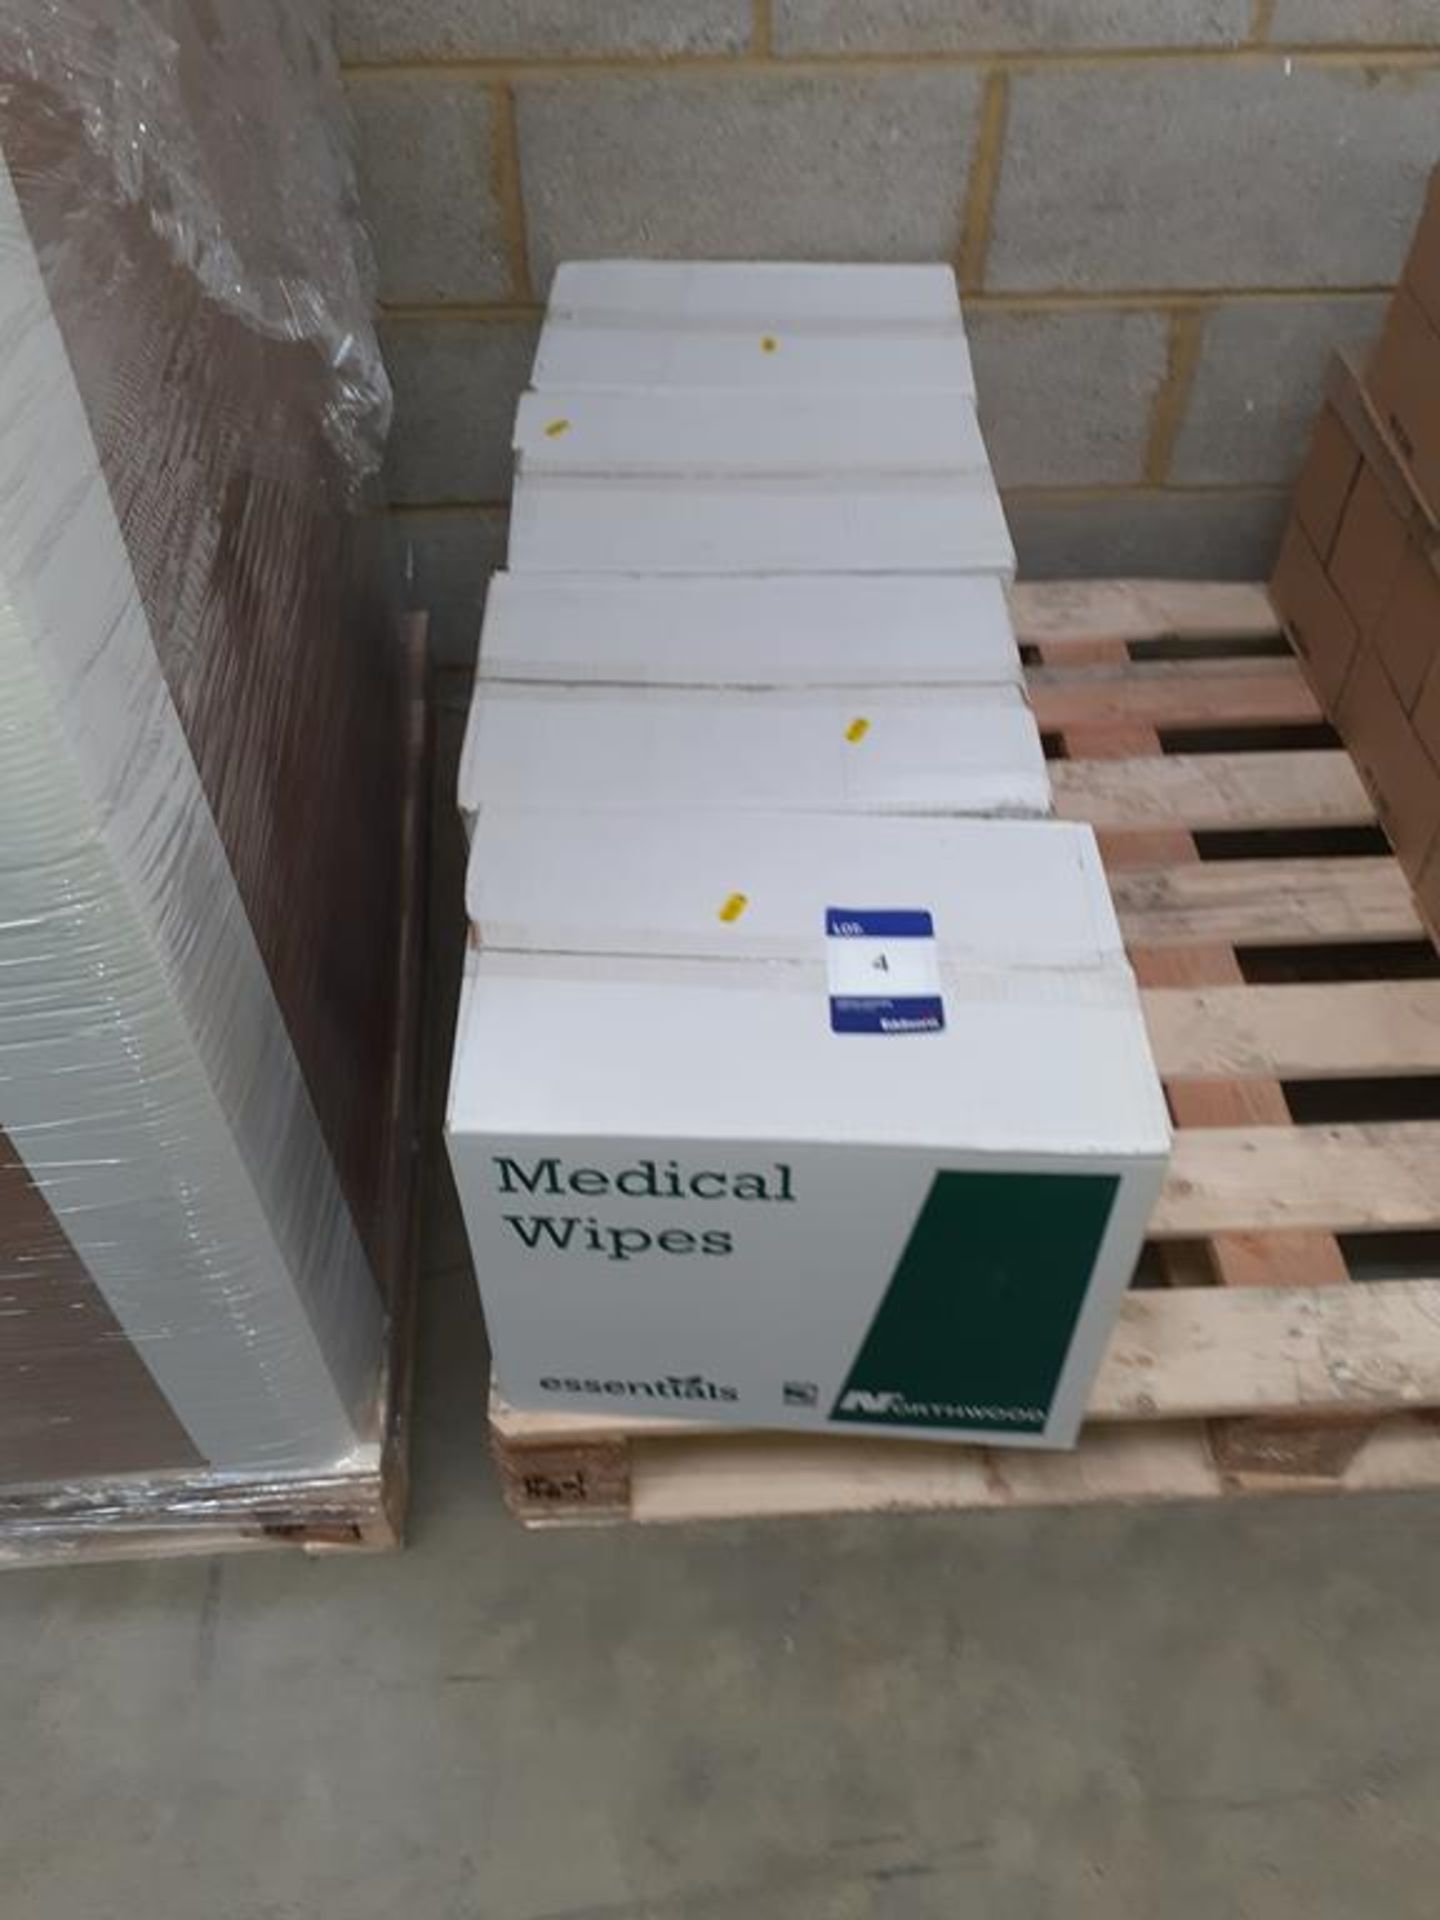 4 x boxes of Medical Wipes